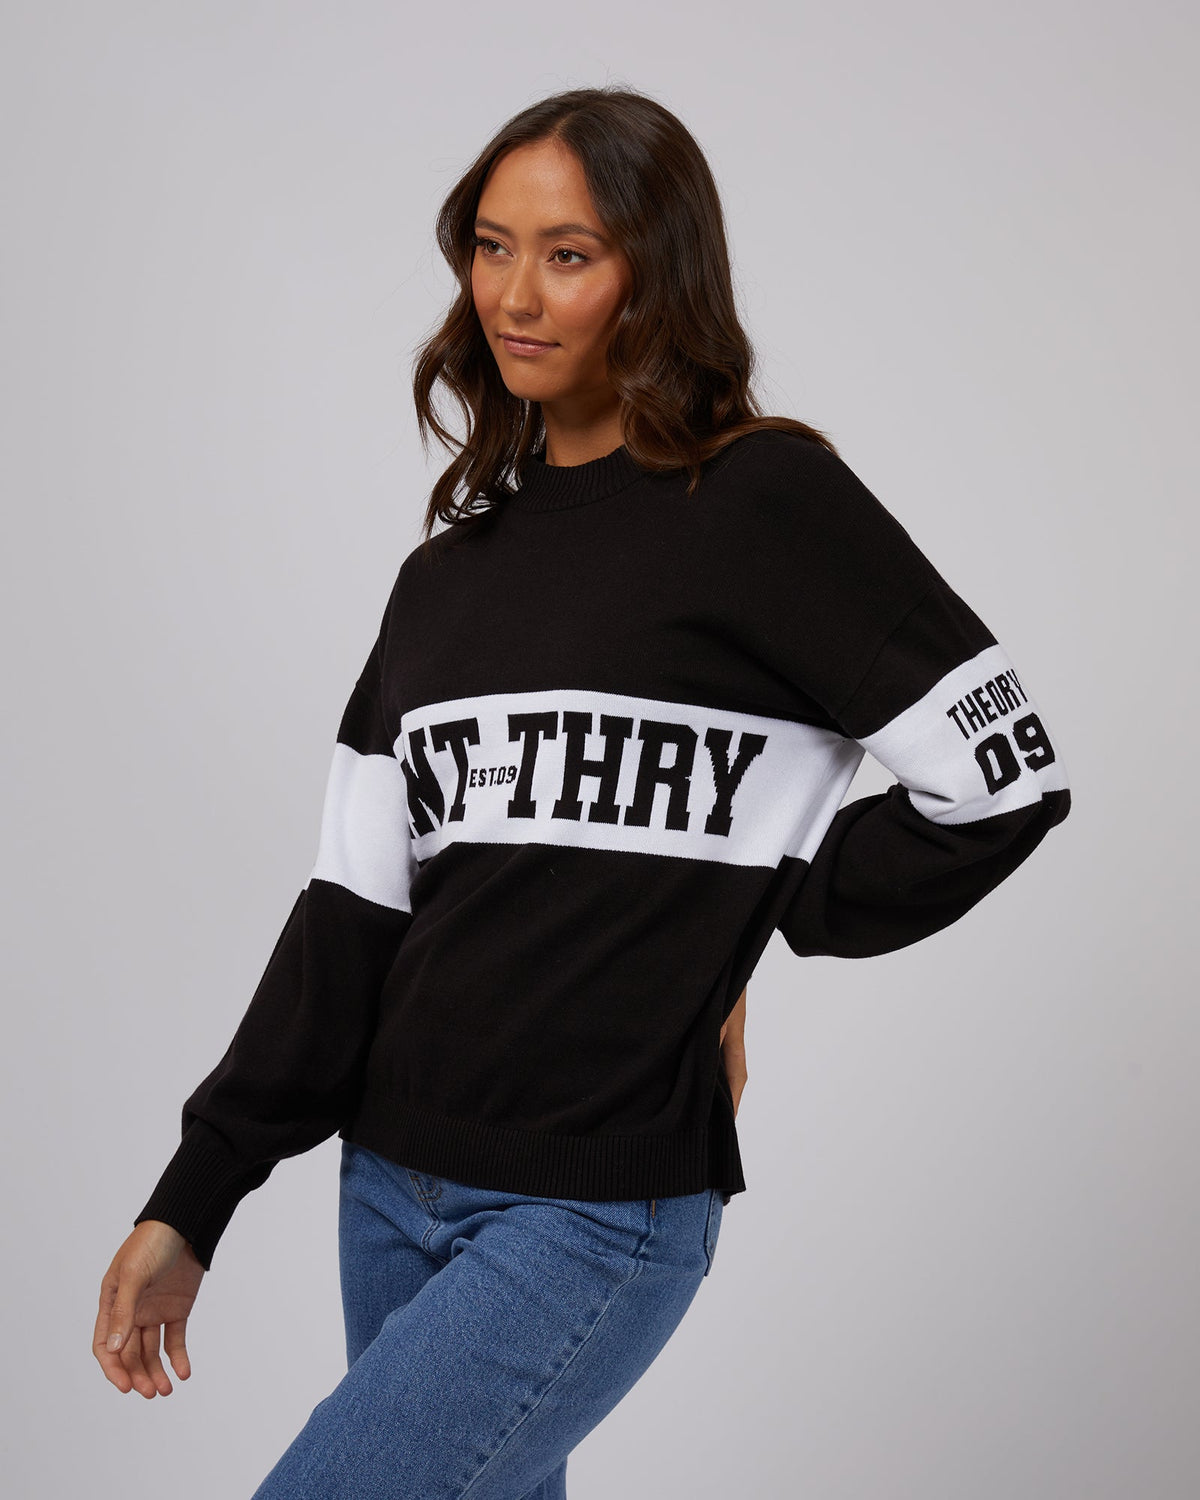 Silent Theory Ladies-Sequence Knit Jumper Black-Edge Clothing